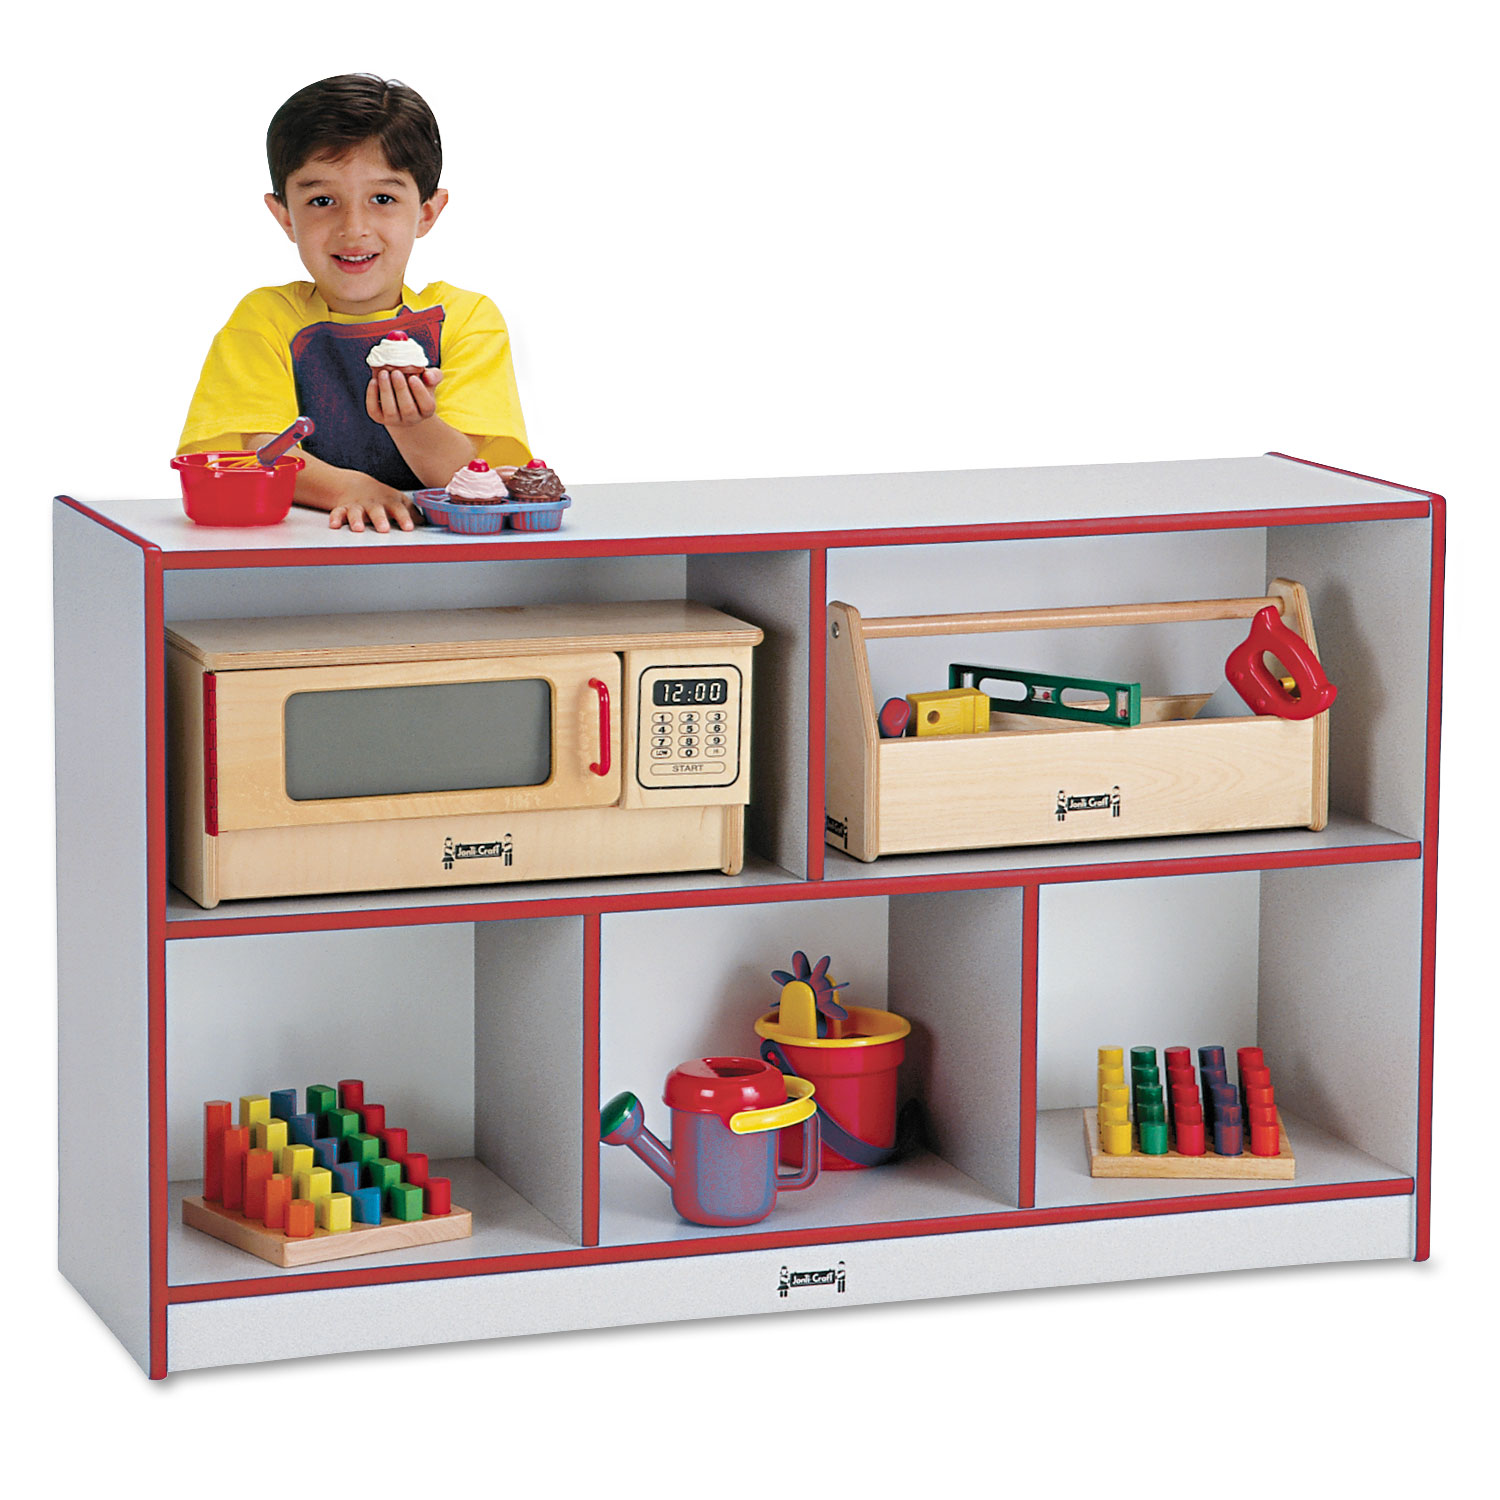 Rainbow Accents Single Storage Units, 48w x 15d x 29-1/2h, Red/Freckled Gray